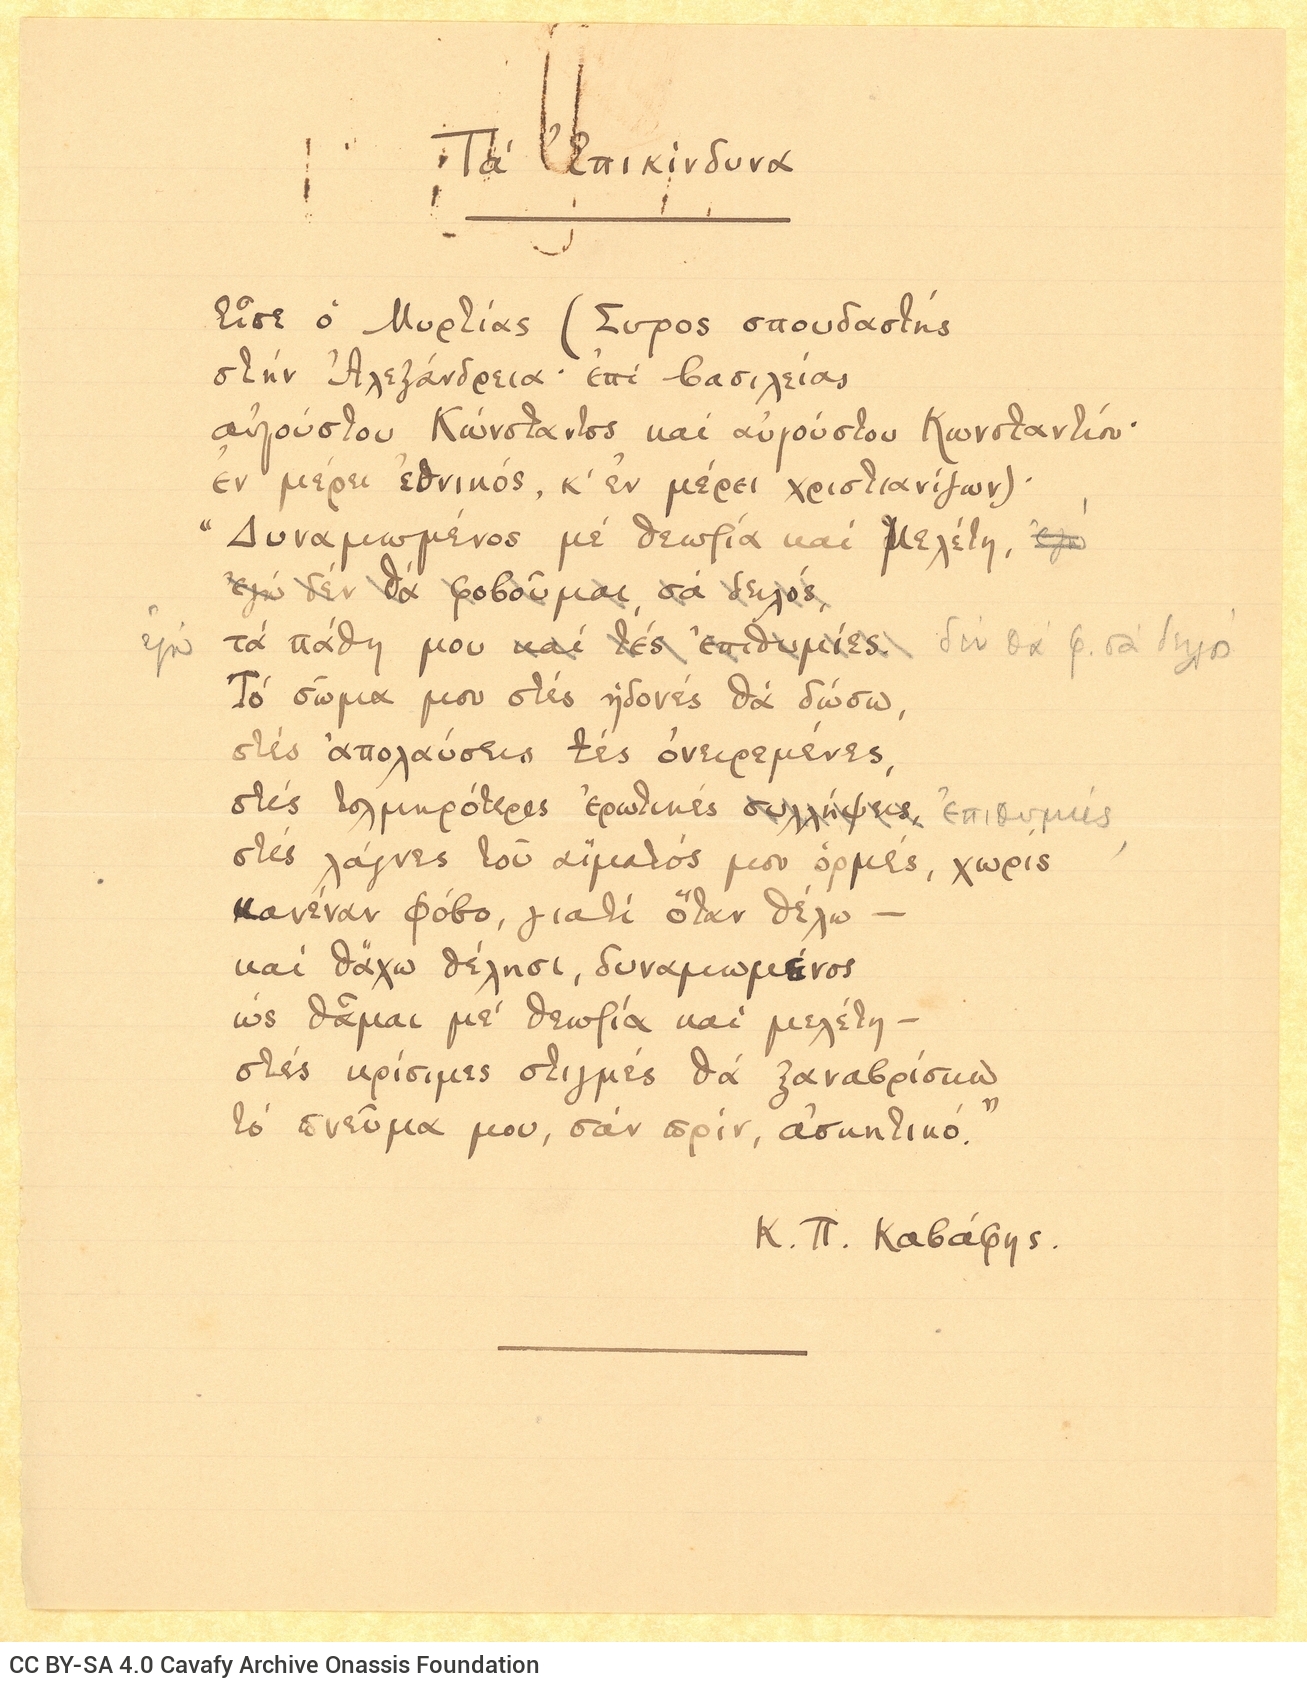 Autograph manuscript of the poem "Dangerous" on one side of a ruled sheet. Cancellations and emendations. Blank verso.